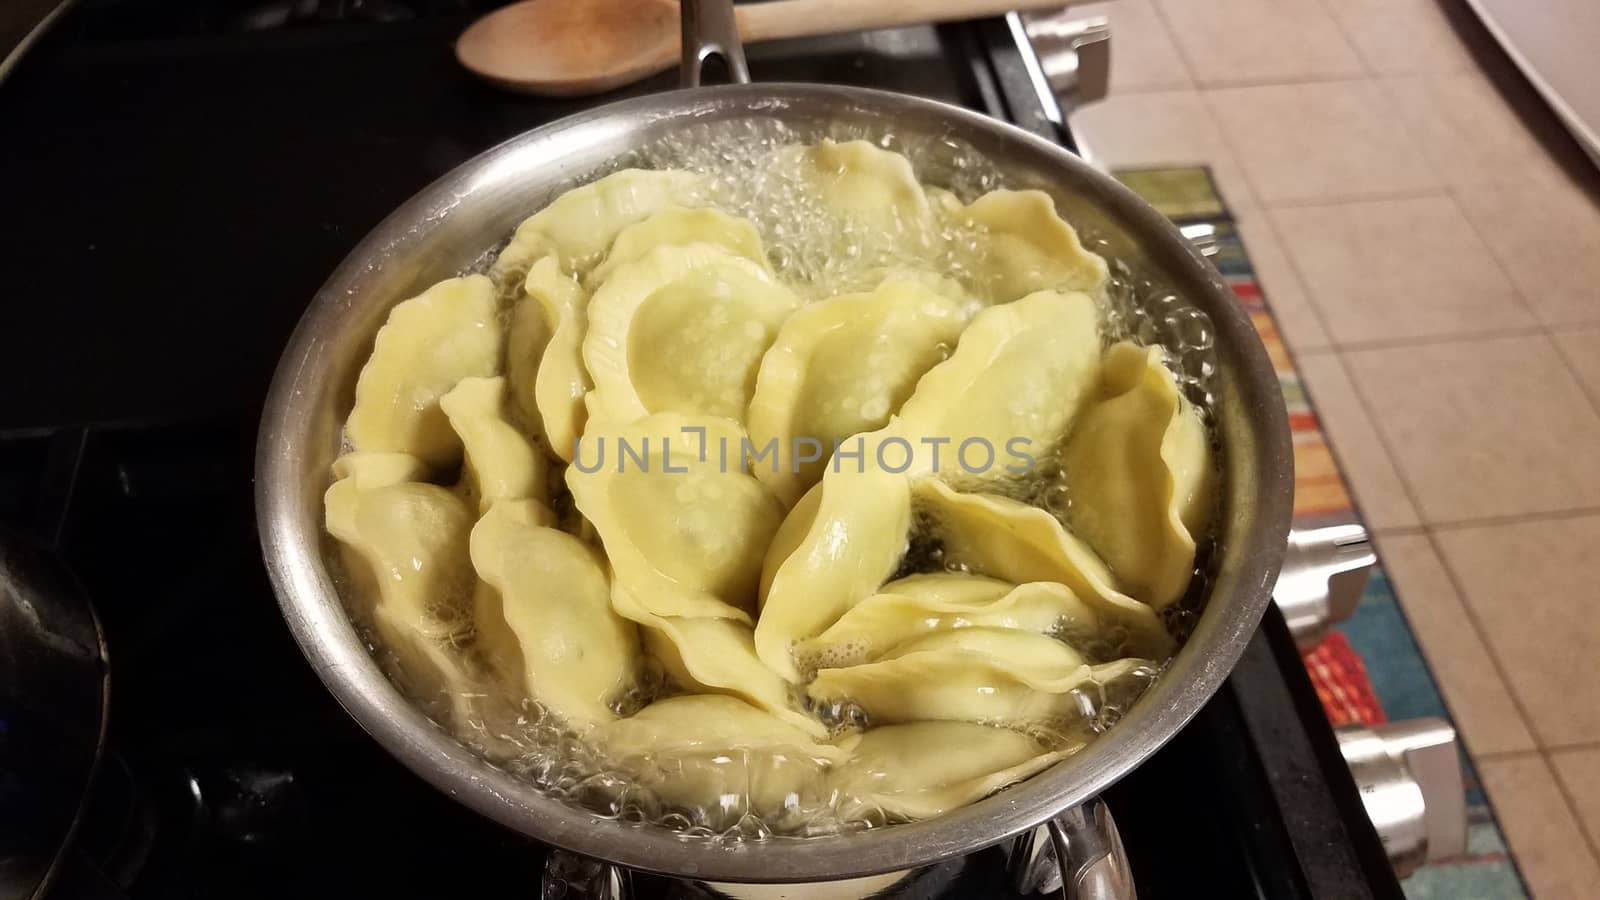 ravioli spinach pasta cooking in pot of boiling water on stove by stockphotofan1